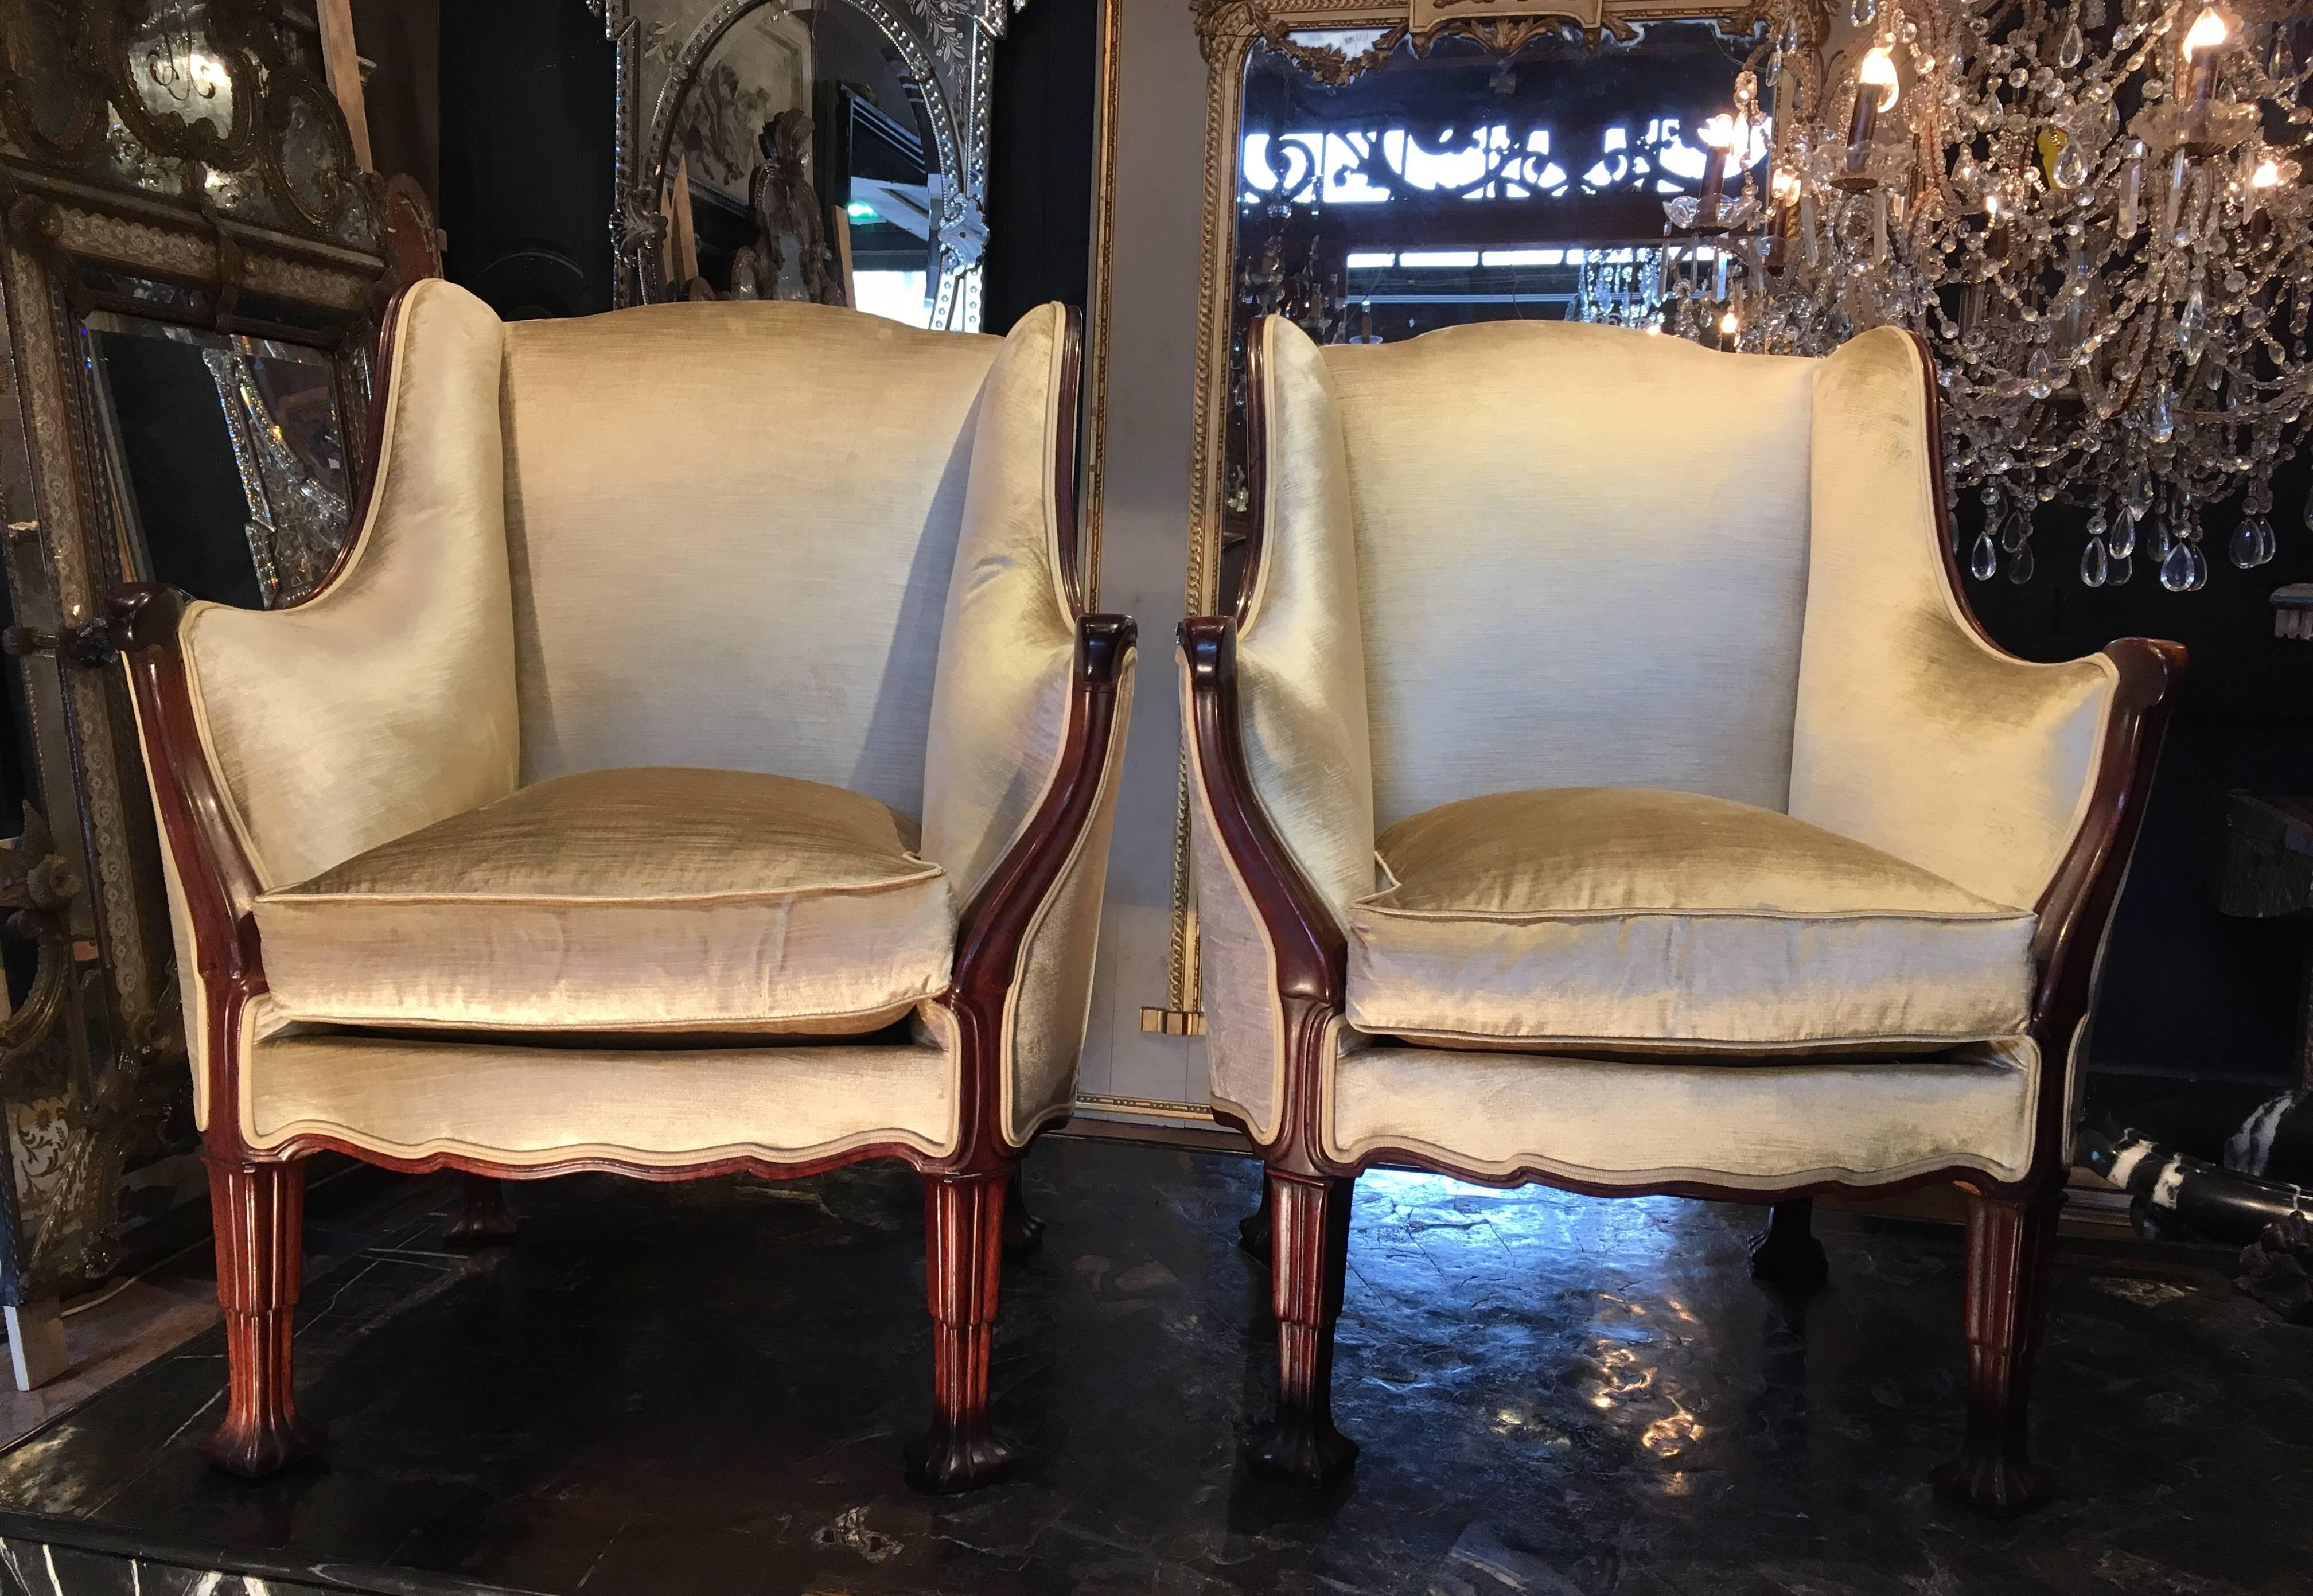 Very elegant set of two armchairs and one sofa, English, Art Nouveau, circa 1900.
Made of mahogany.
Reupholstered with zippers and feather cushions.
Old gold to lime color fabric.

In very good condition, see photos.

Dimensions of the